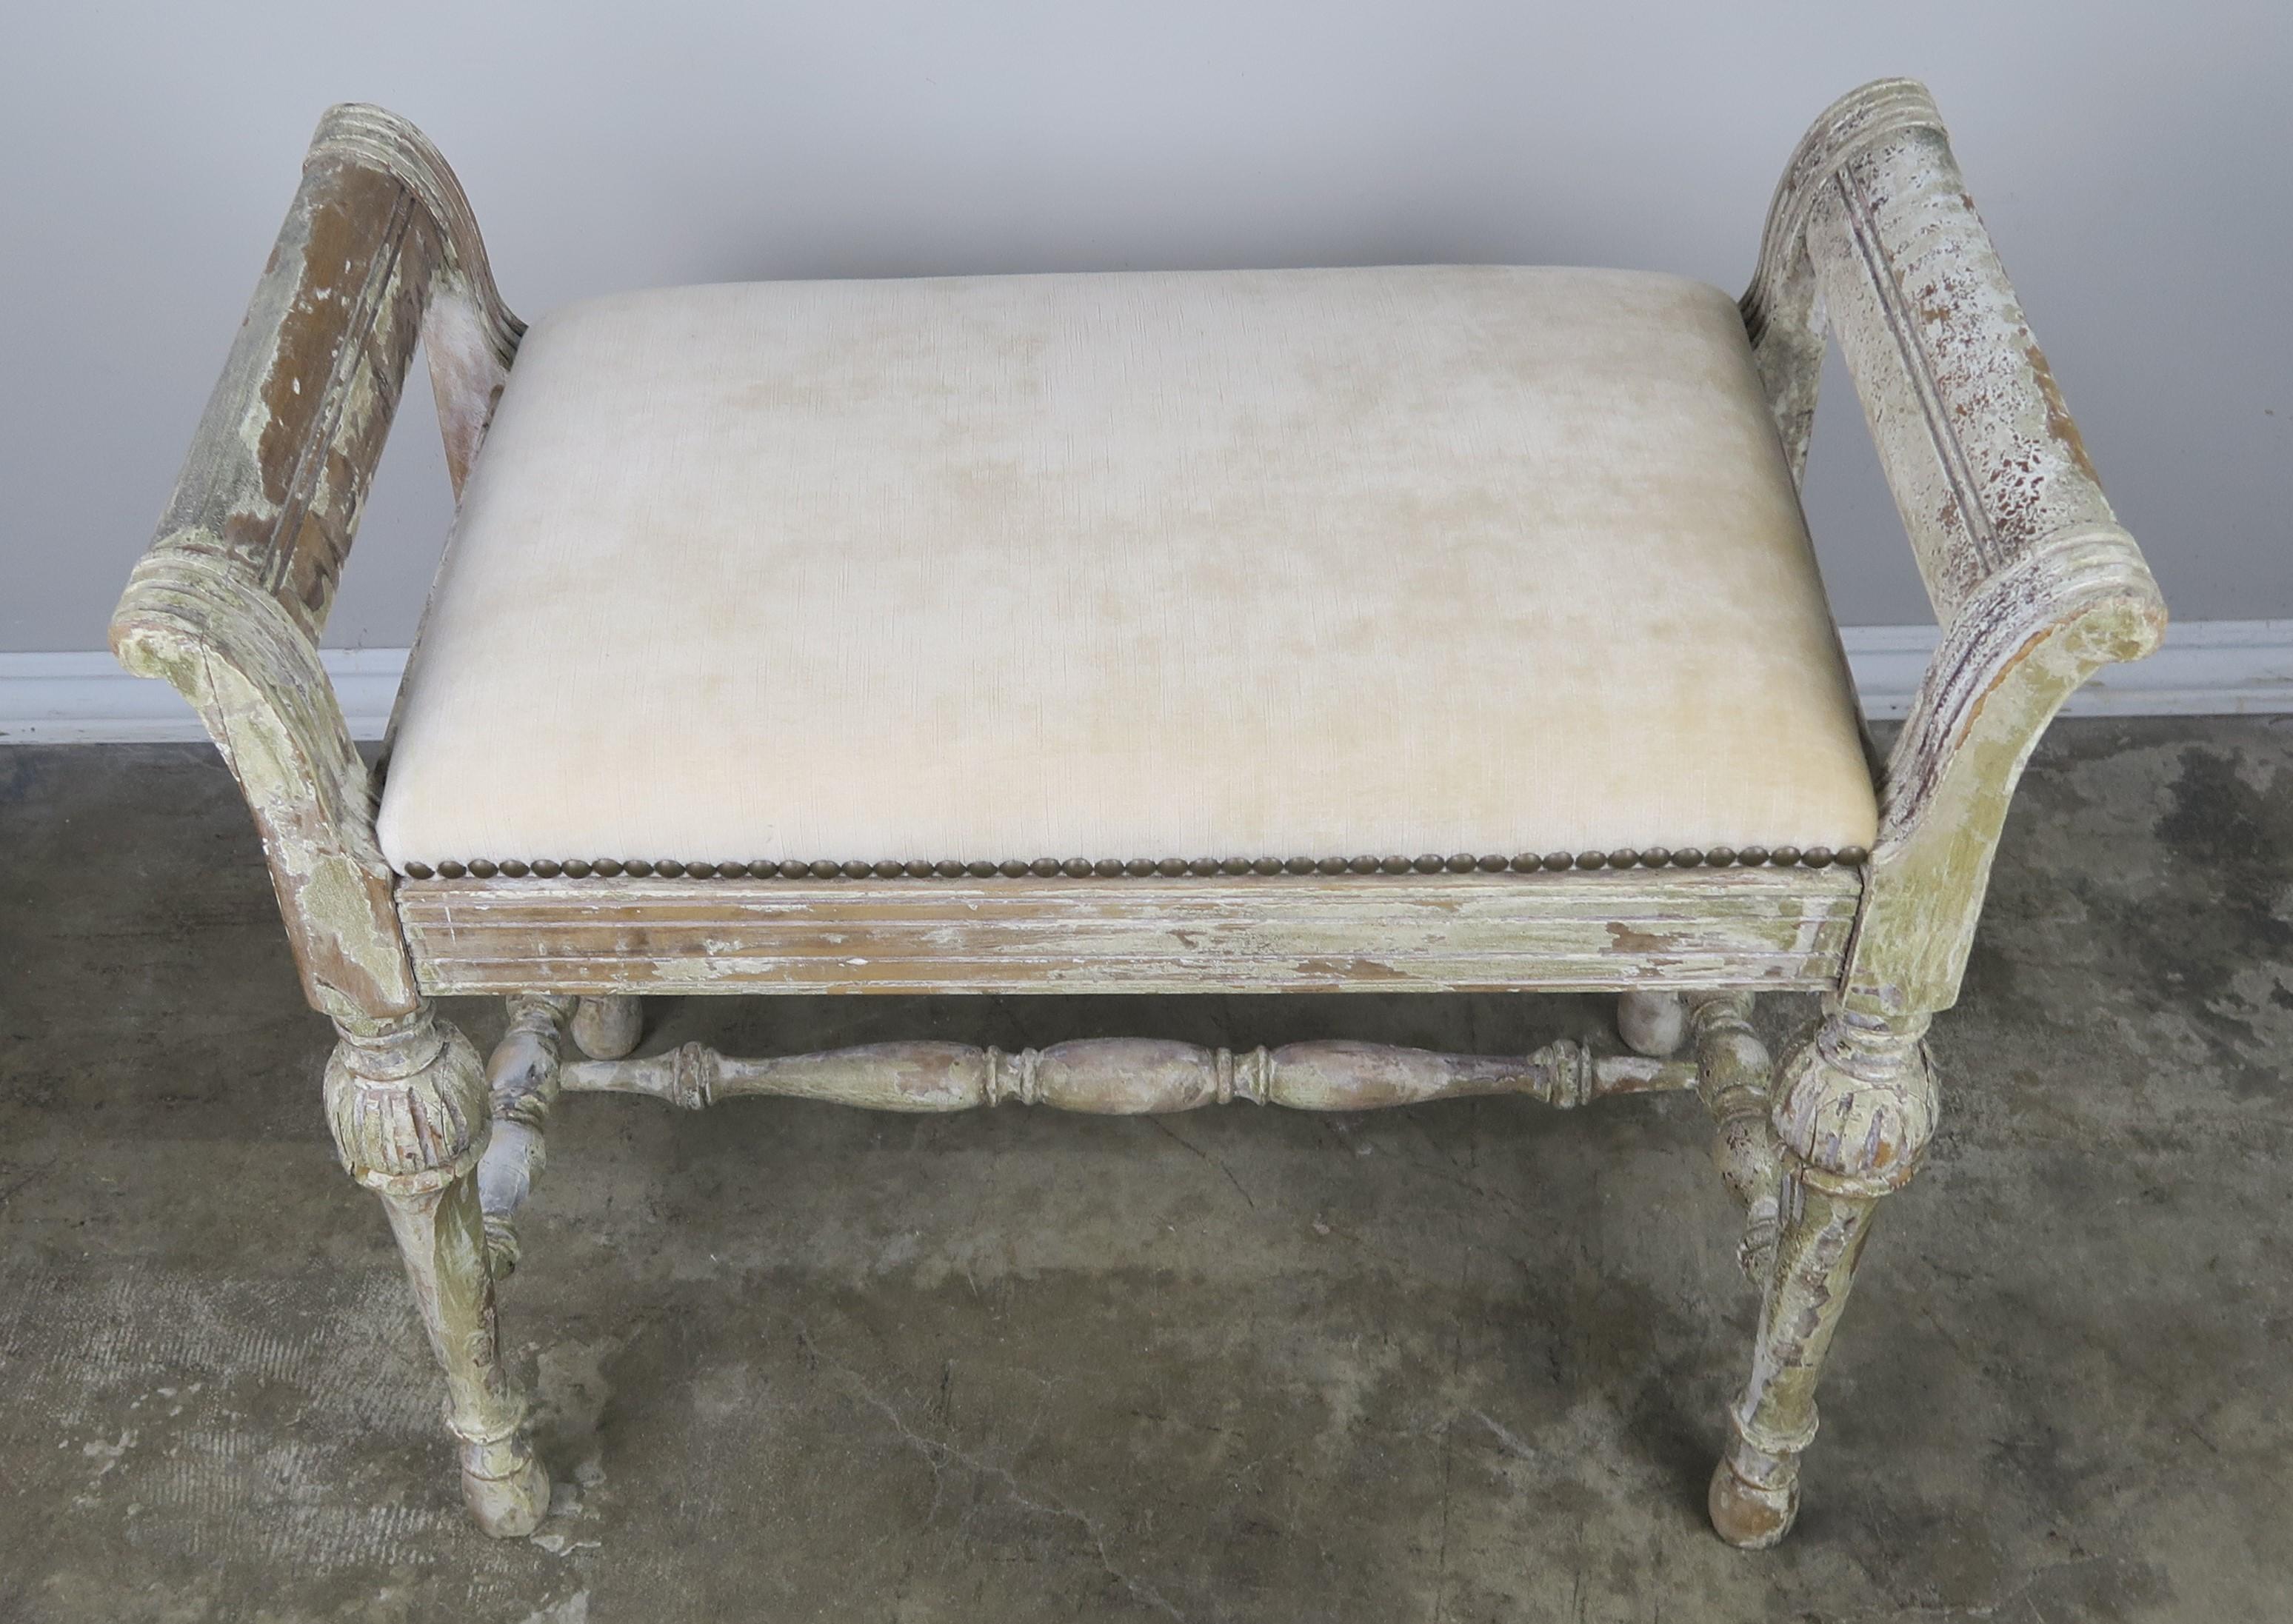 Swedish painted velvet upholstered vanity bench. The bench is newly upholstered in new cream colored velvet with antique brass colored nailhead trim detail.
Seat height 19